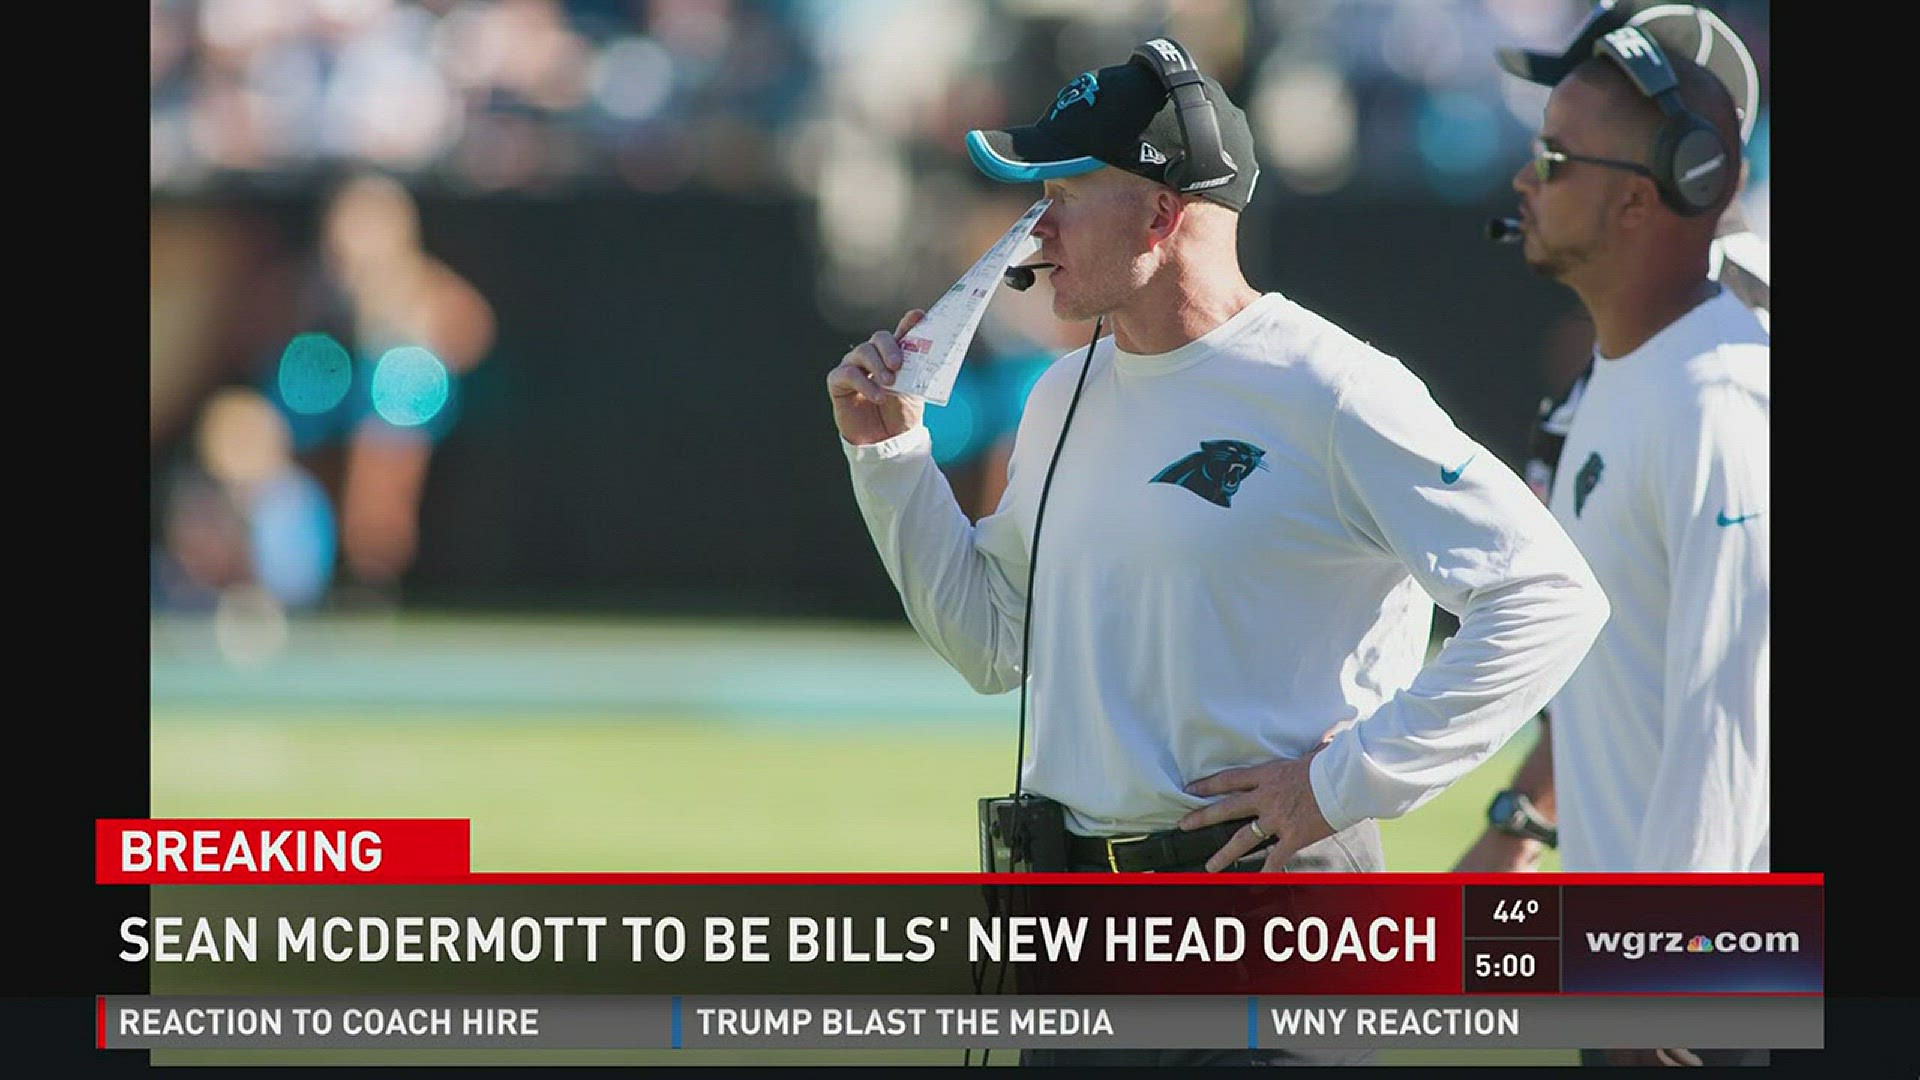 2 On Your Side's Sports Director Adam Benigni runs through what Sean McDermott being chosen as the next Bill's head coach may mean for the team's future.